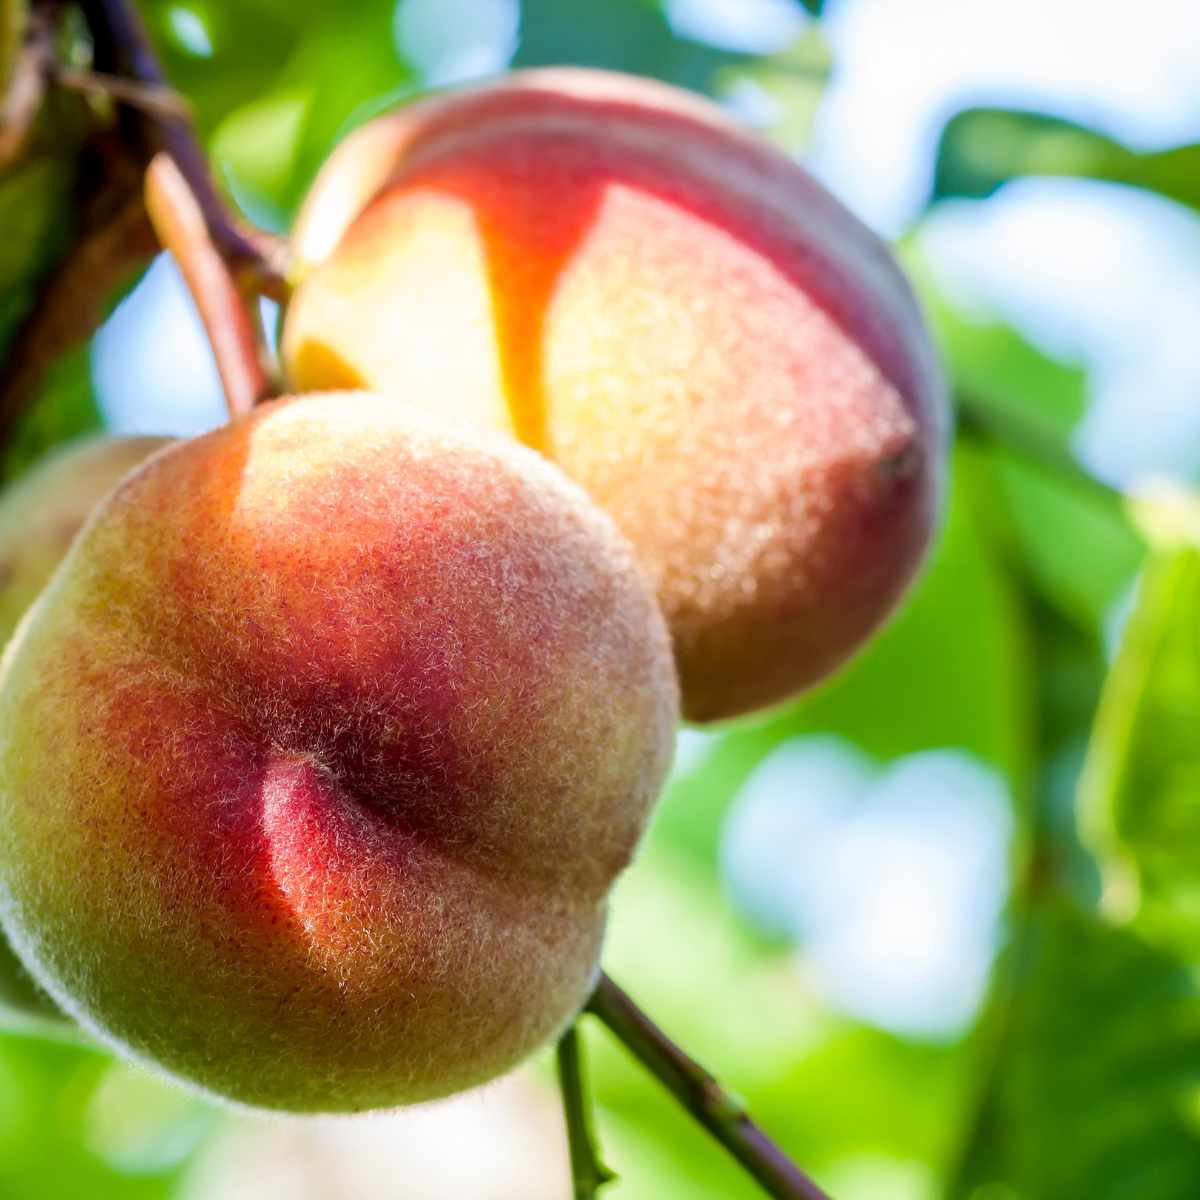 Best Tips for Starting / Growing an Organic Fruit Orchard